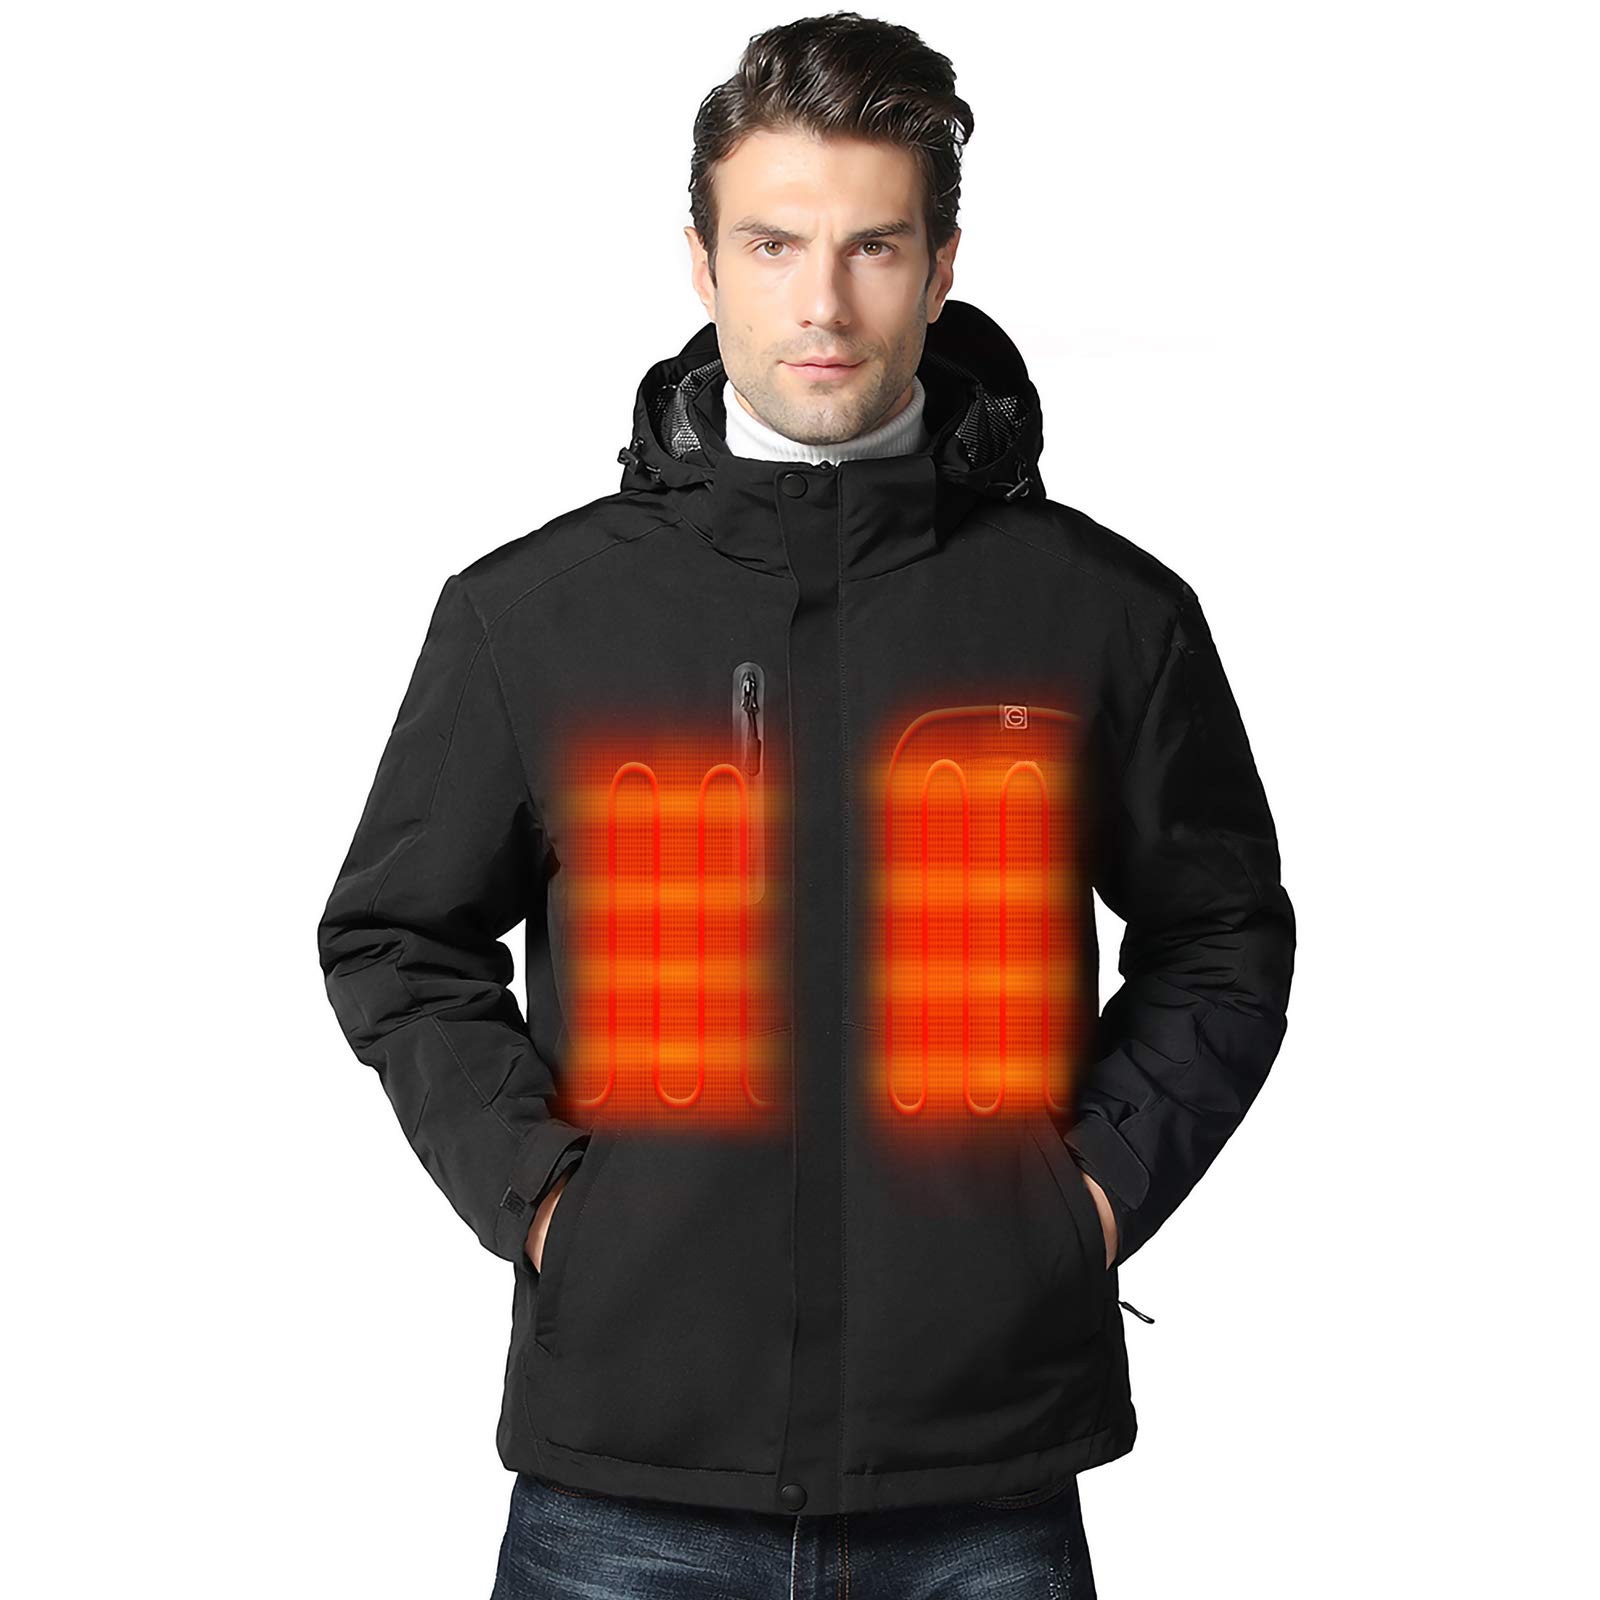 Men's Heated Jacket with Battery Pack 5V